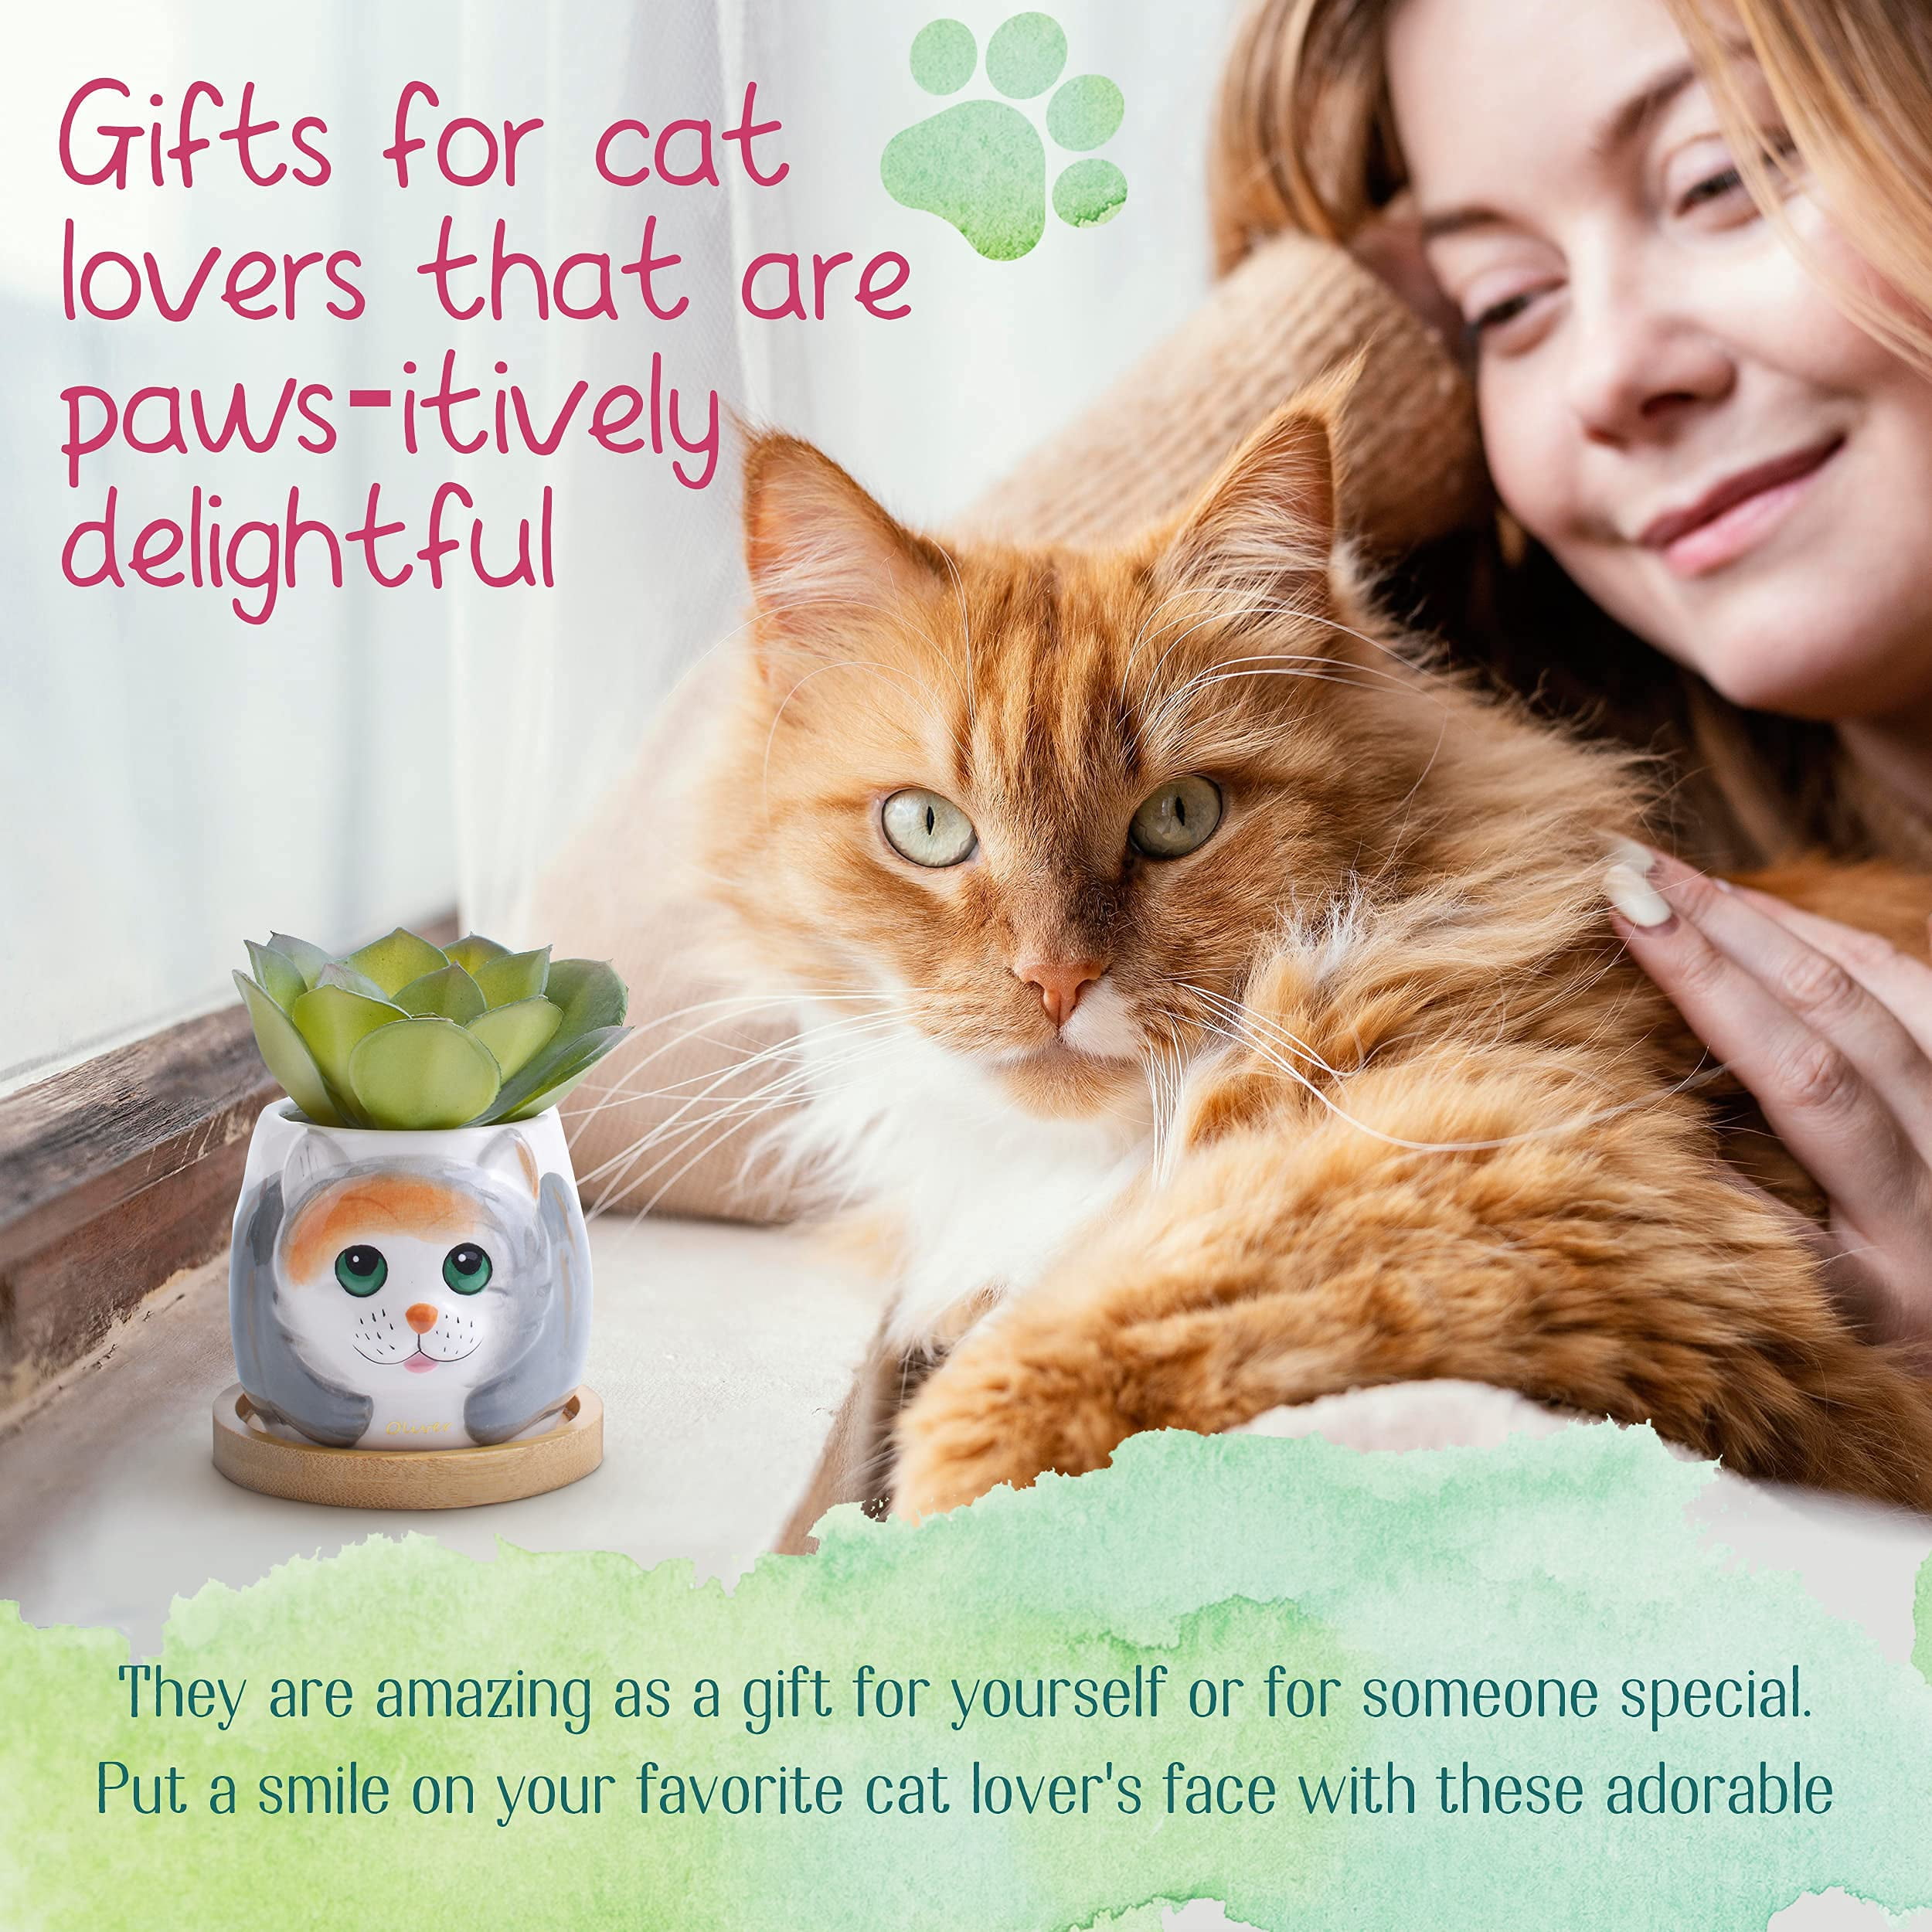 15 Valentine's Gifts For Your Pets That Are Paws-itively Purrfect